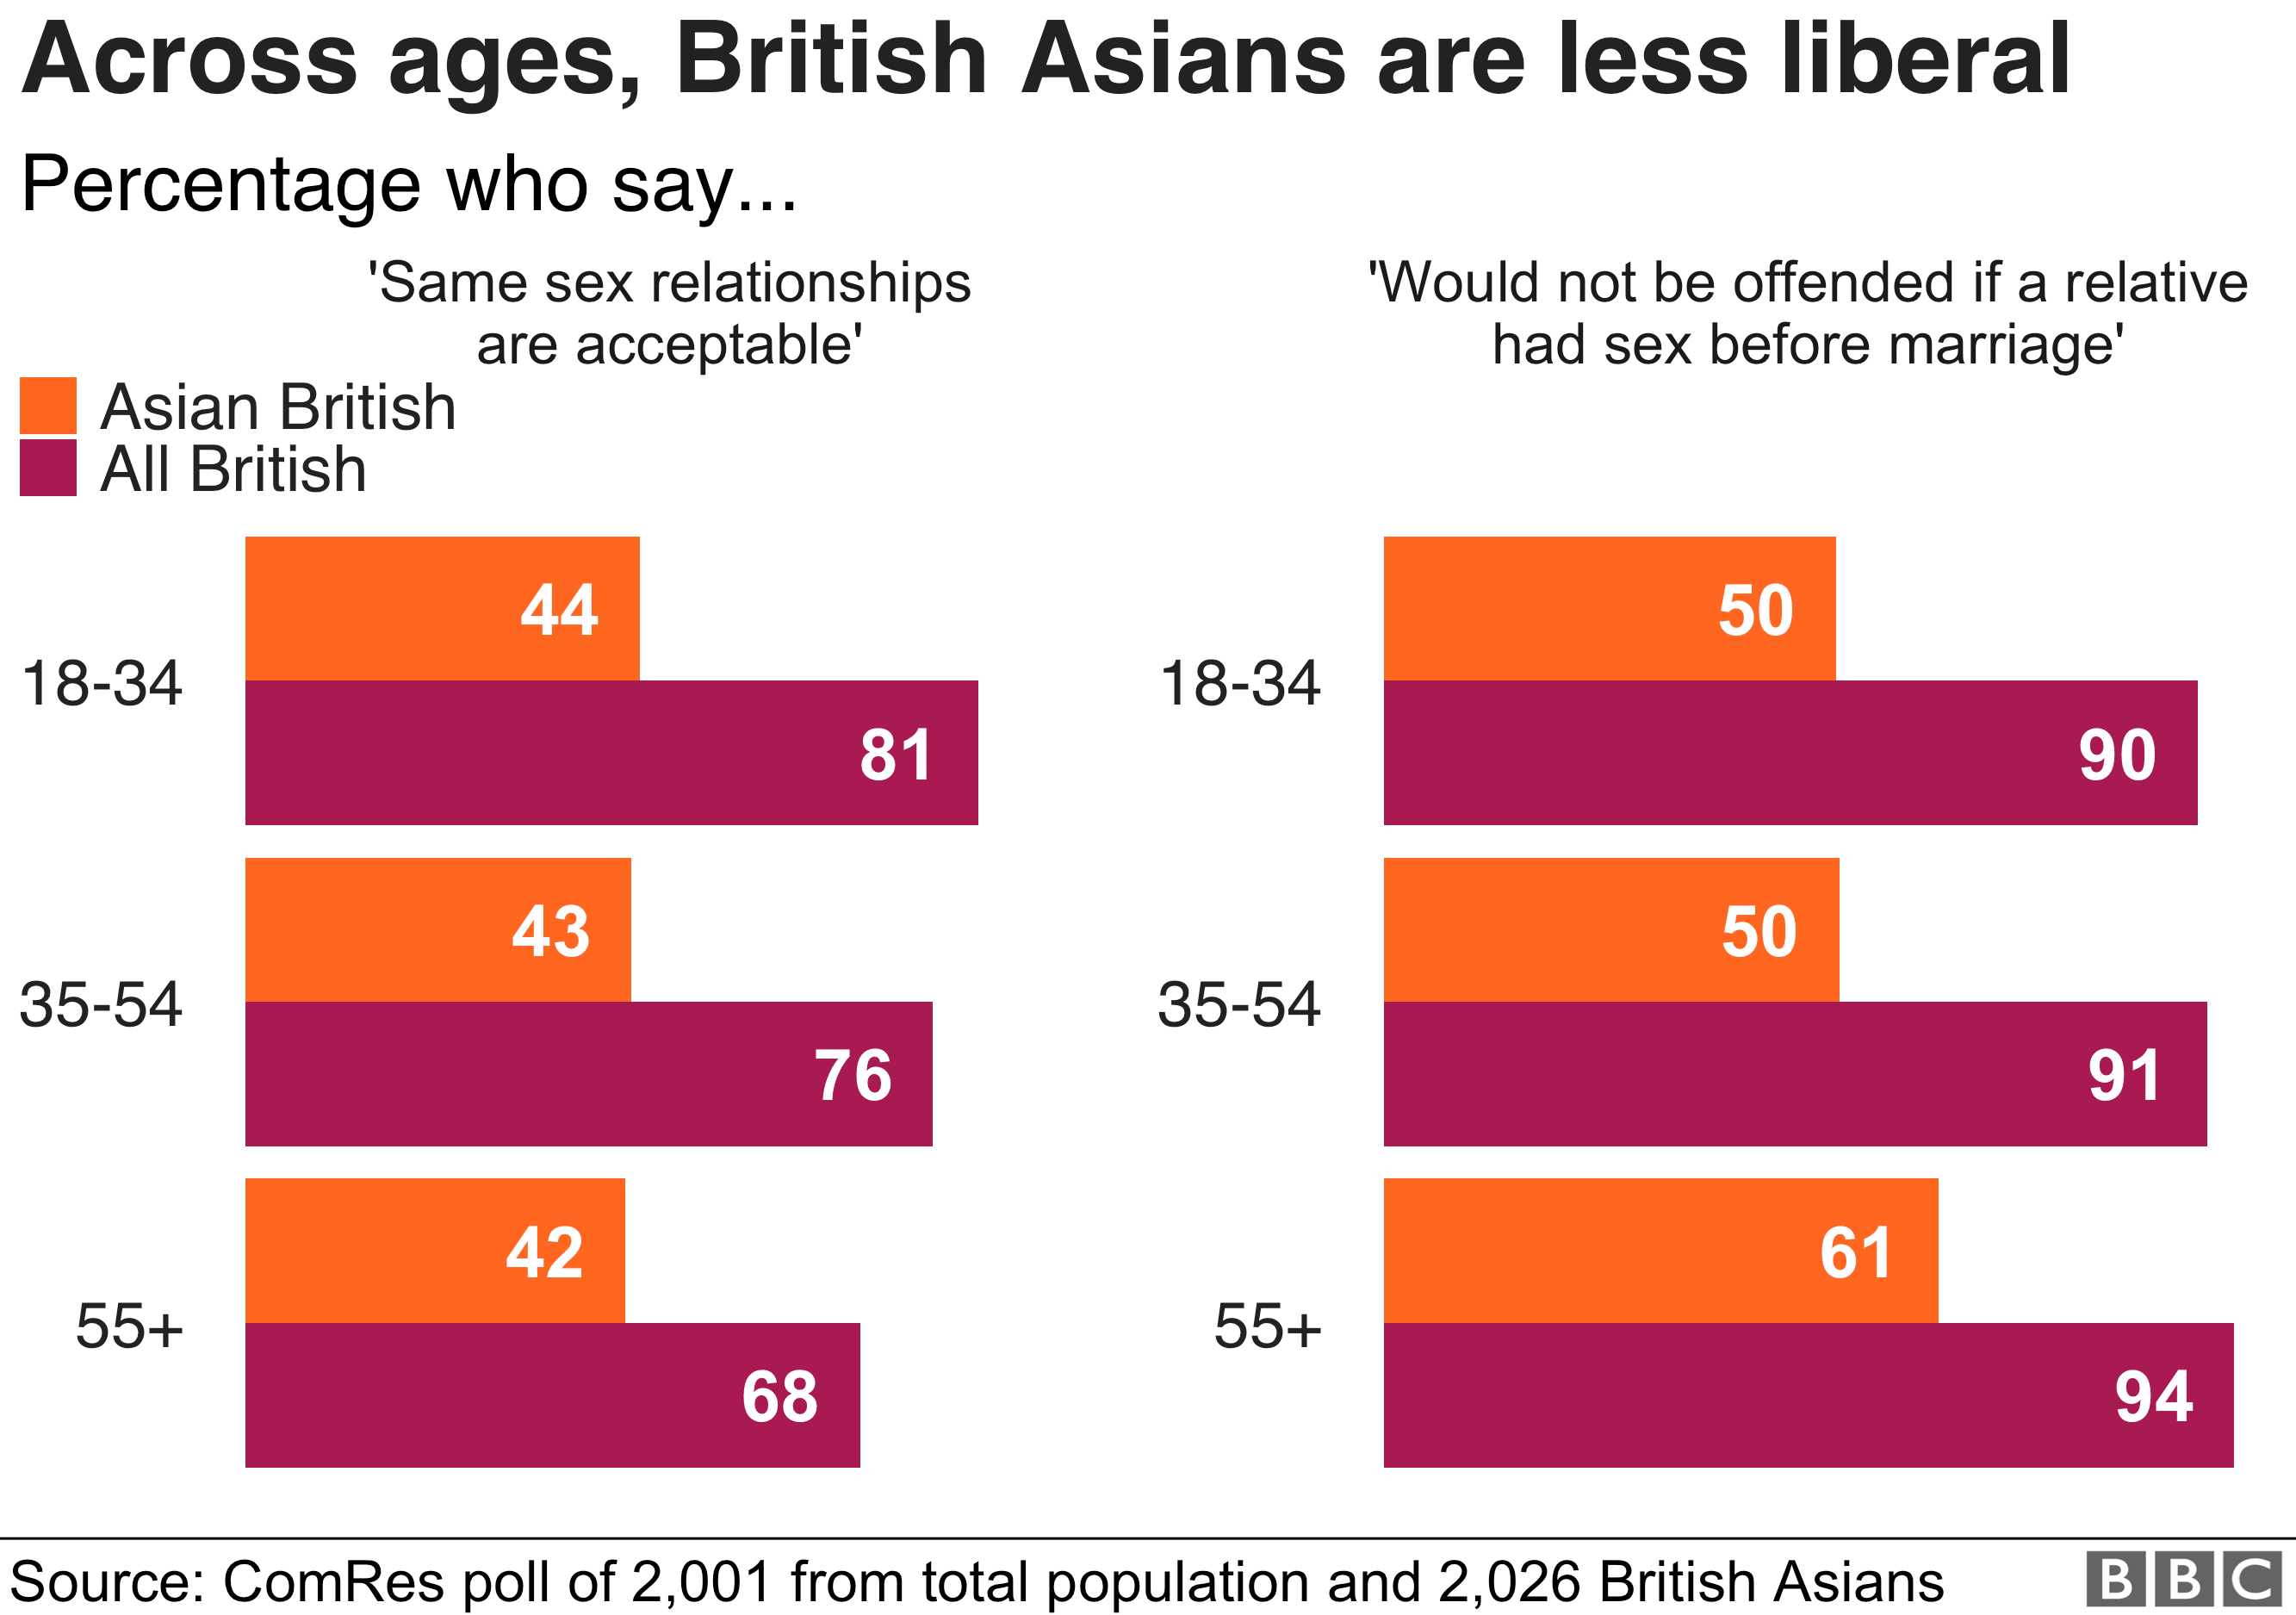 Chart showing how British Asians are more conservative on sex before marriage and same sex relationships